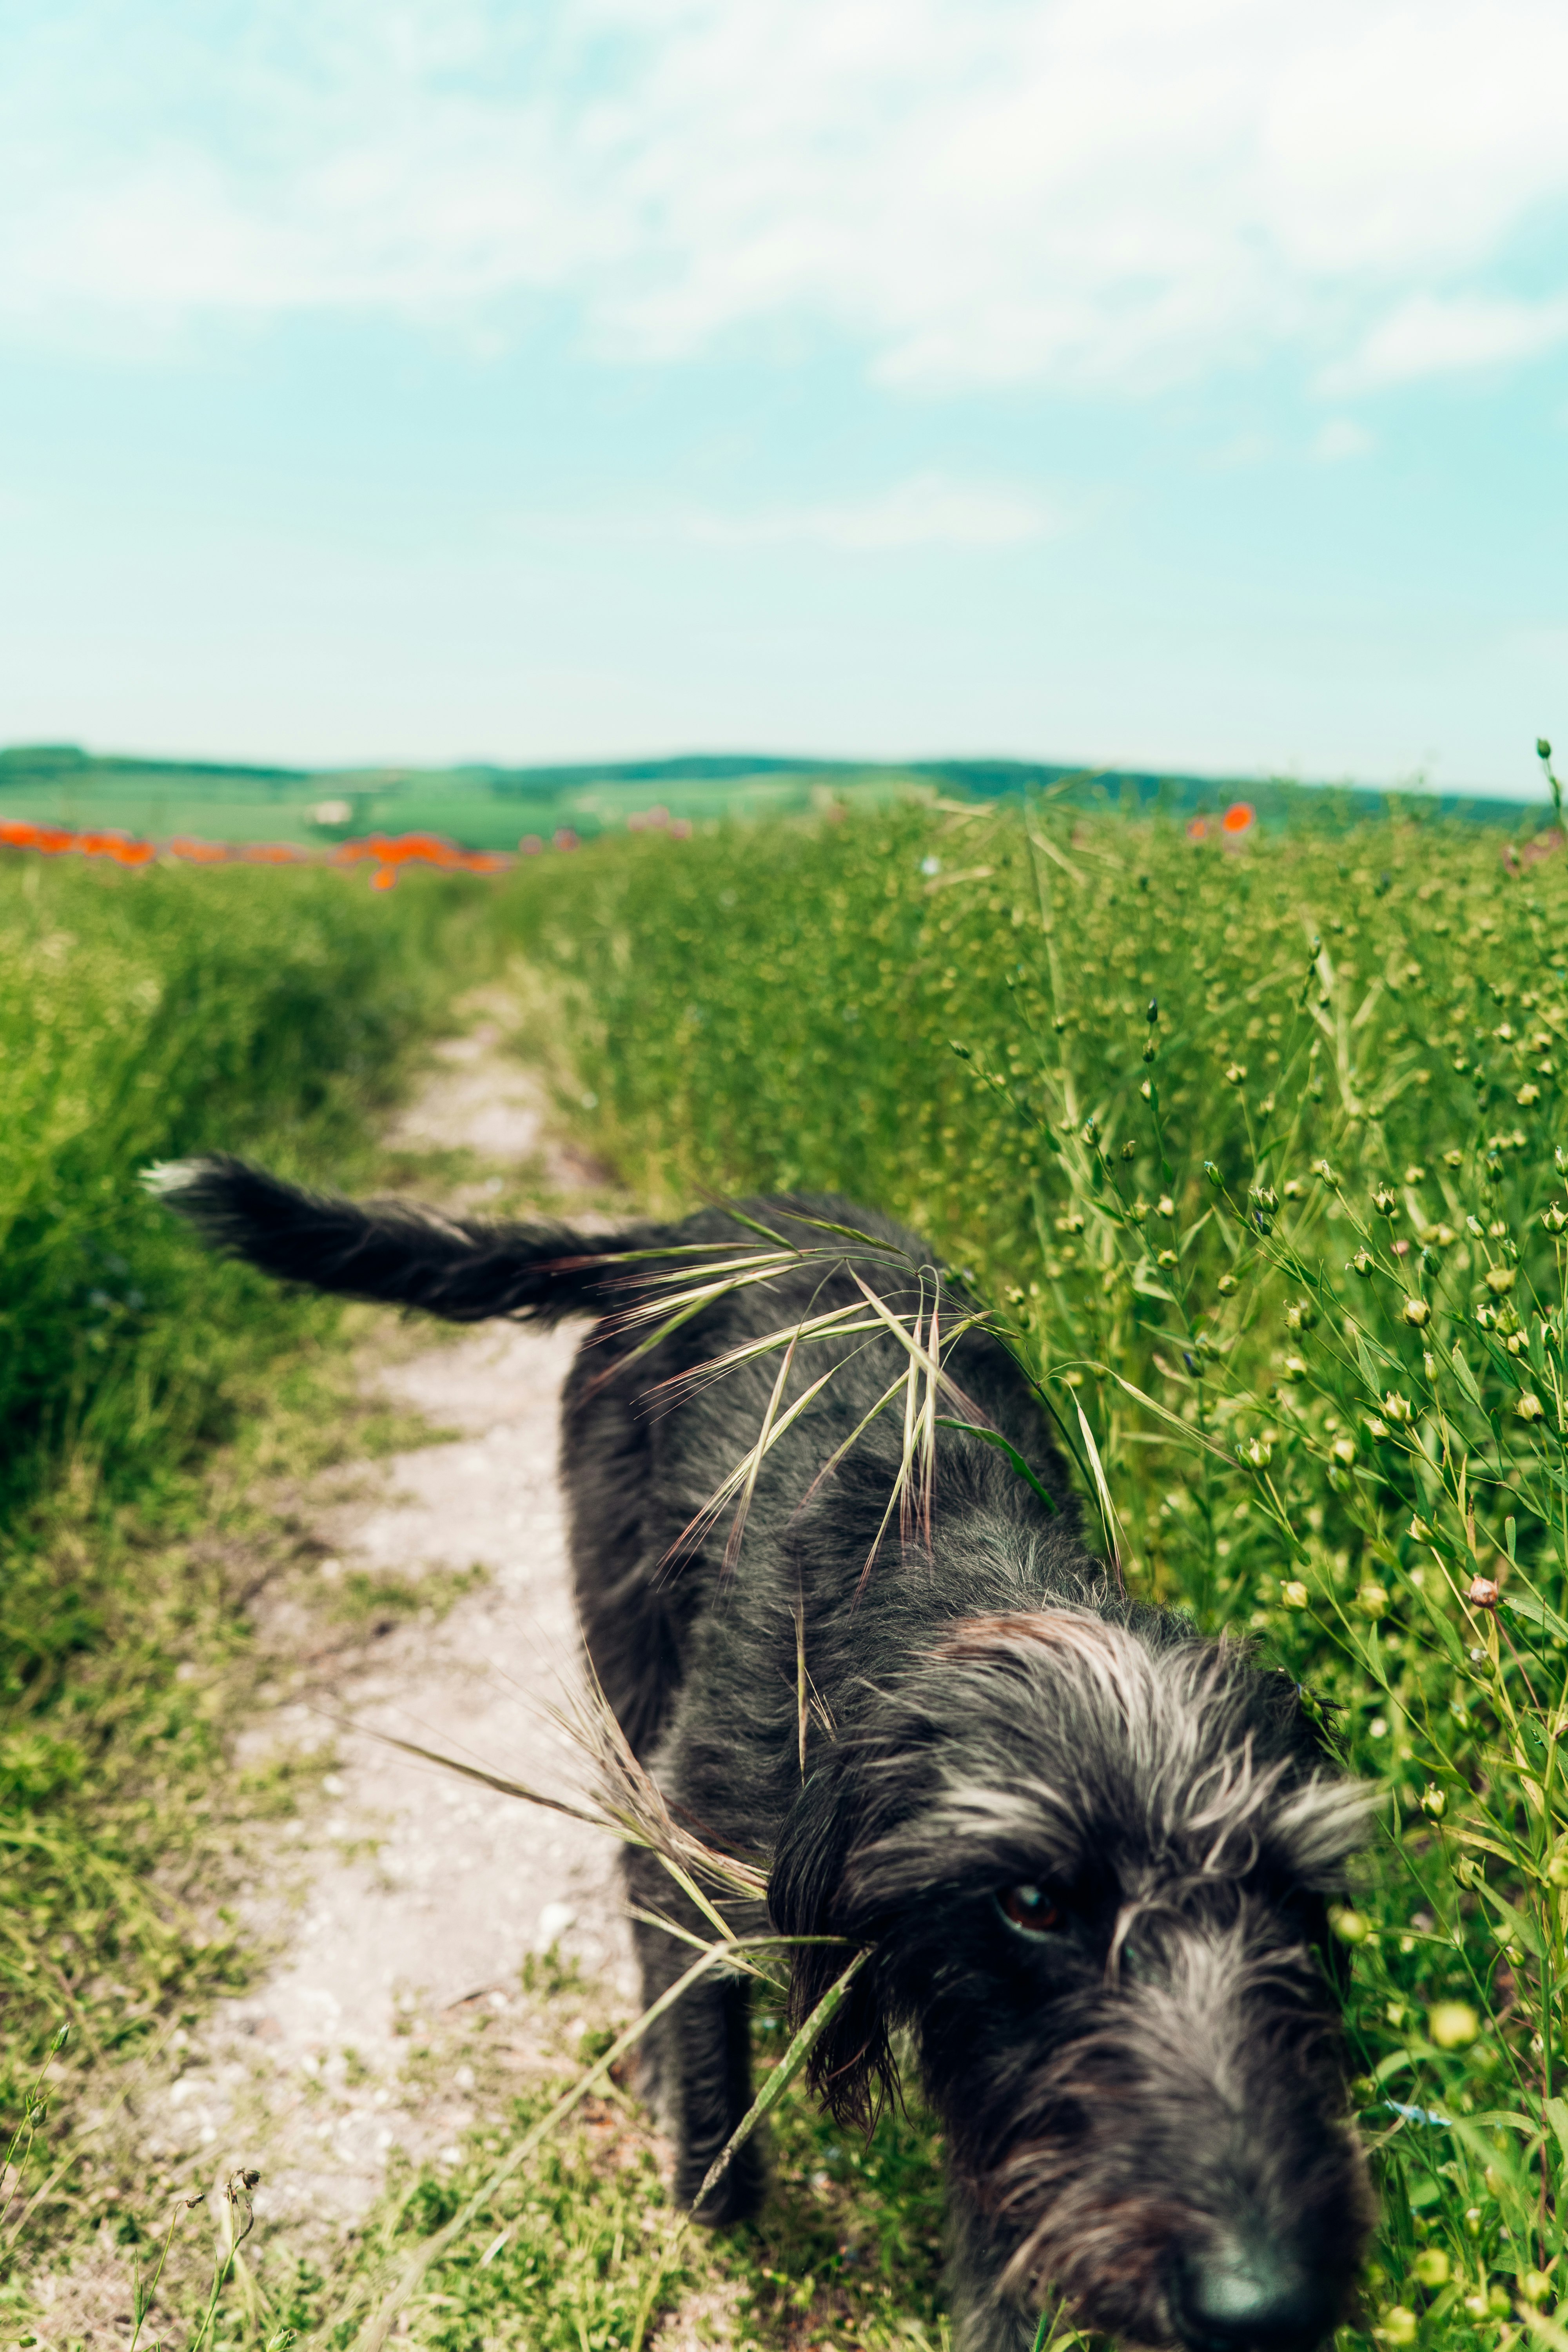 black and white long coated small dog running on green grass field during daytime